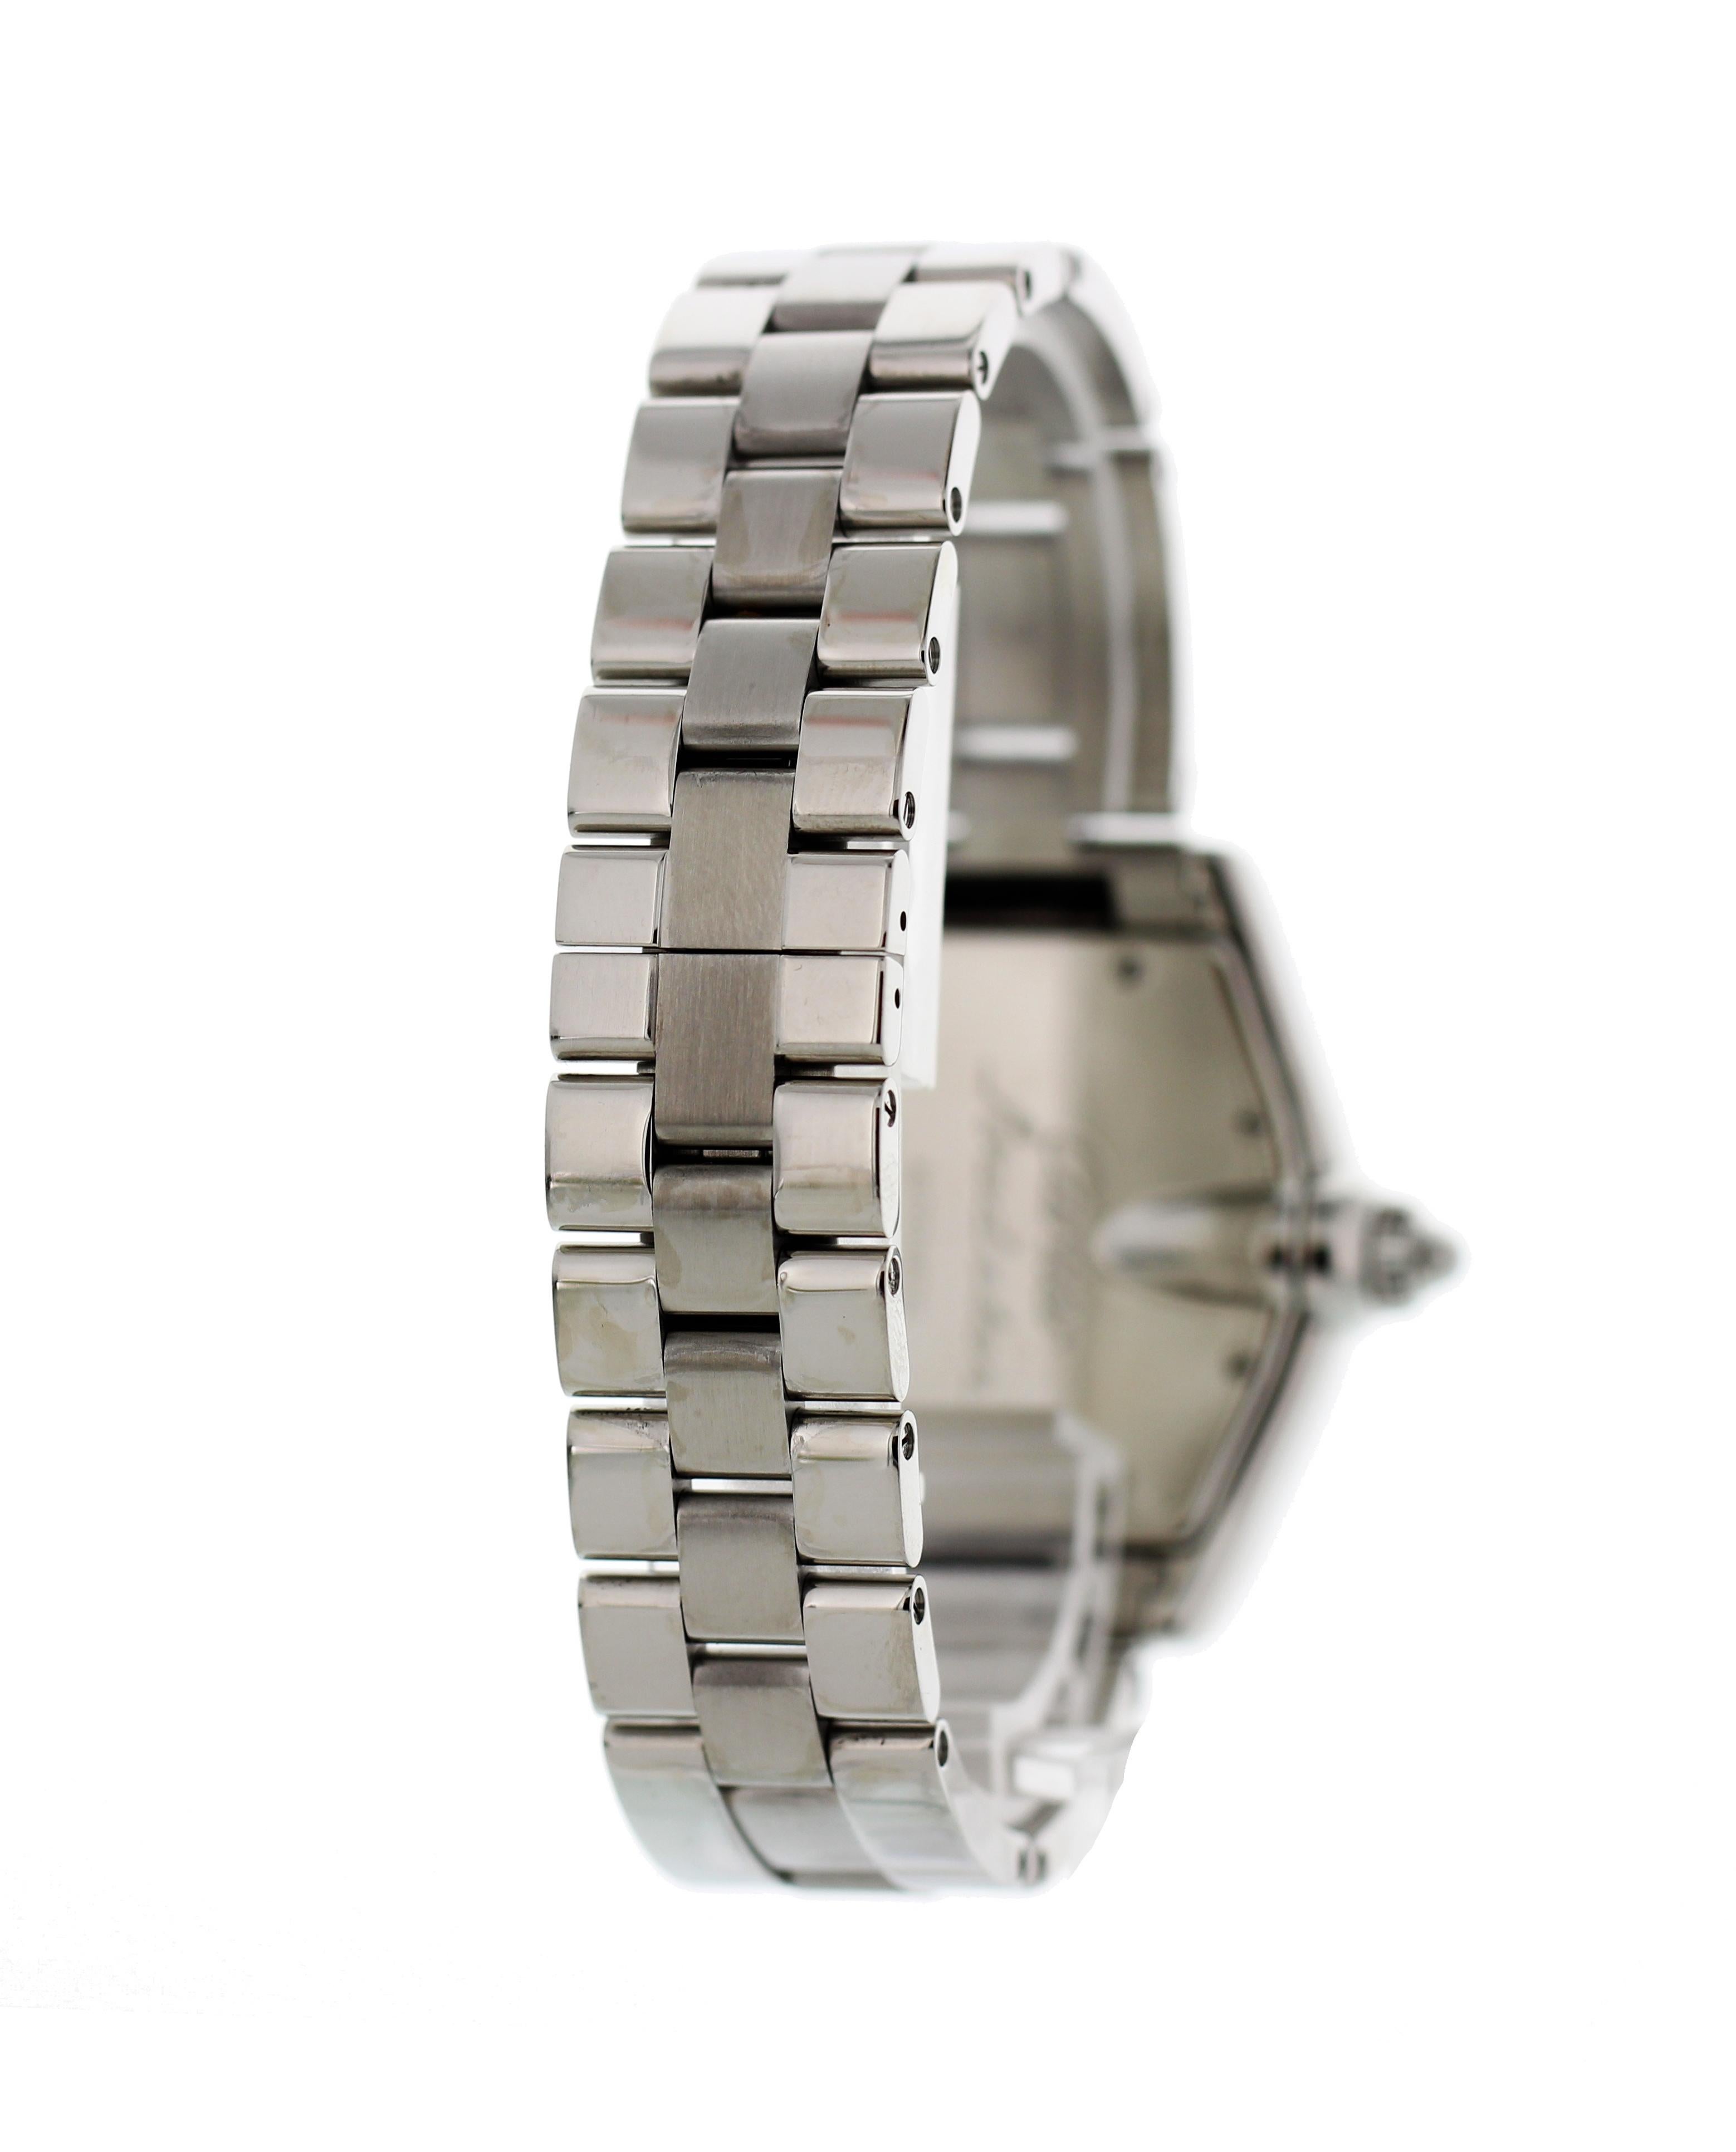 Cartier Roadster Stainless Steel Automatic 2510 In Excellent Condition For Sale In New York, NY